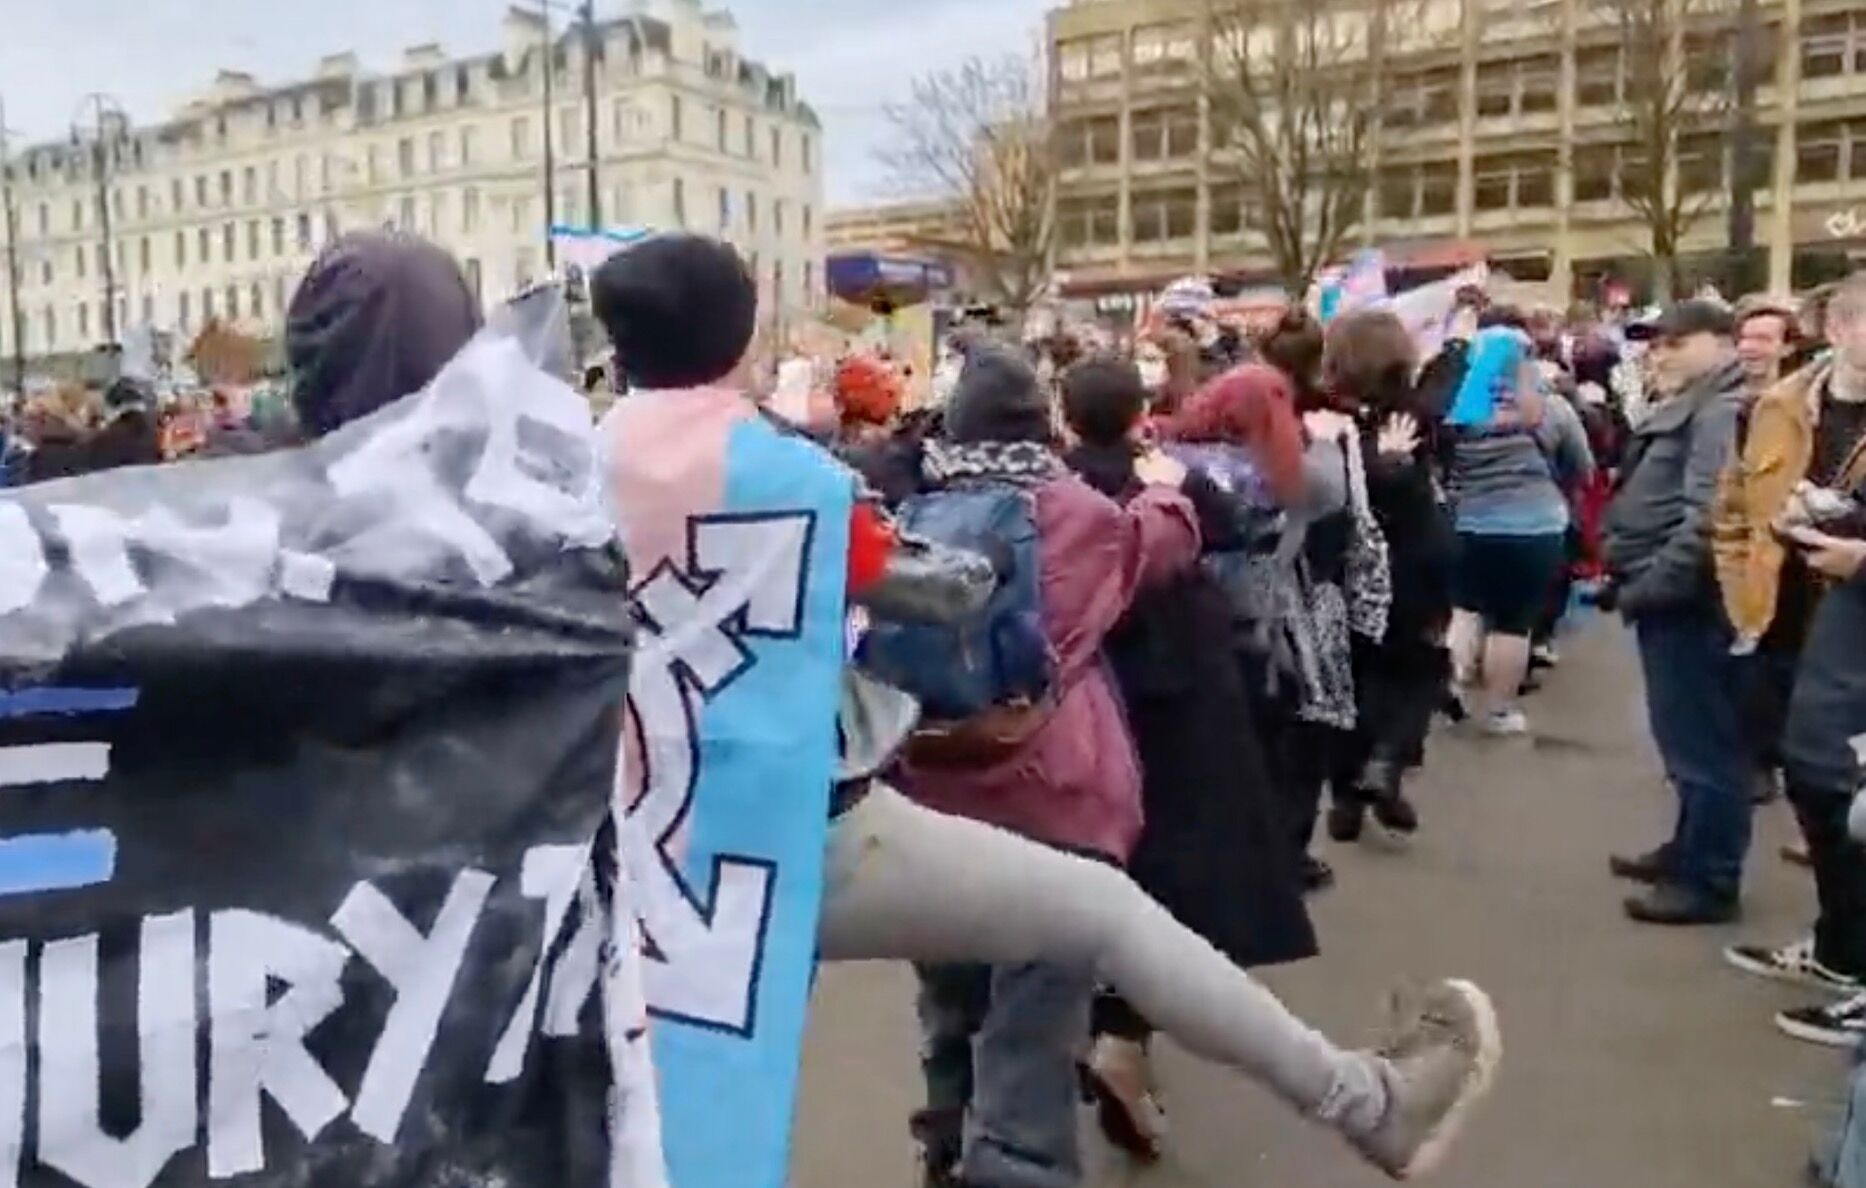 Counterprotests conga and sing "trans rights" to drown out a TERF rally led by Posie Parker